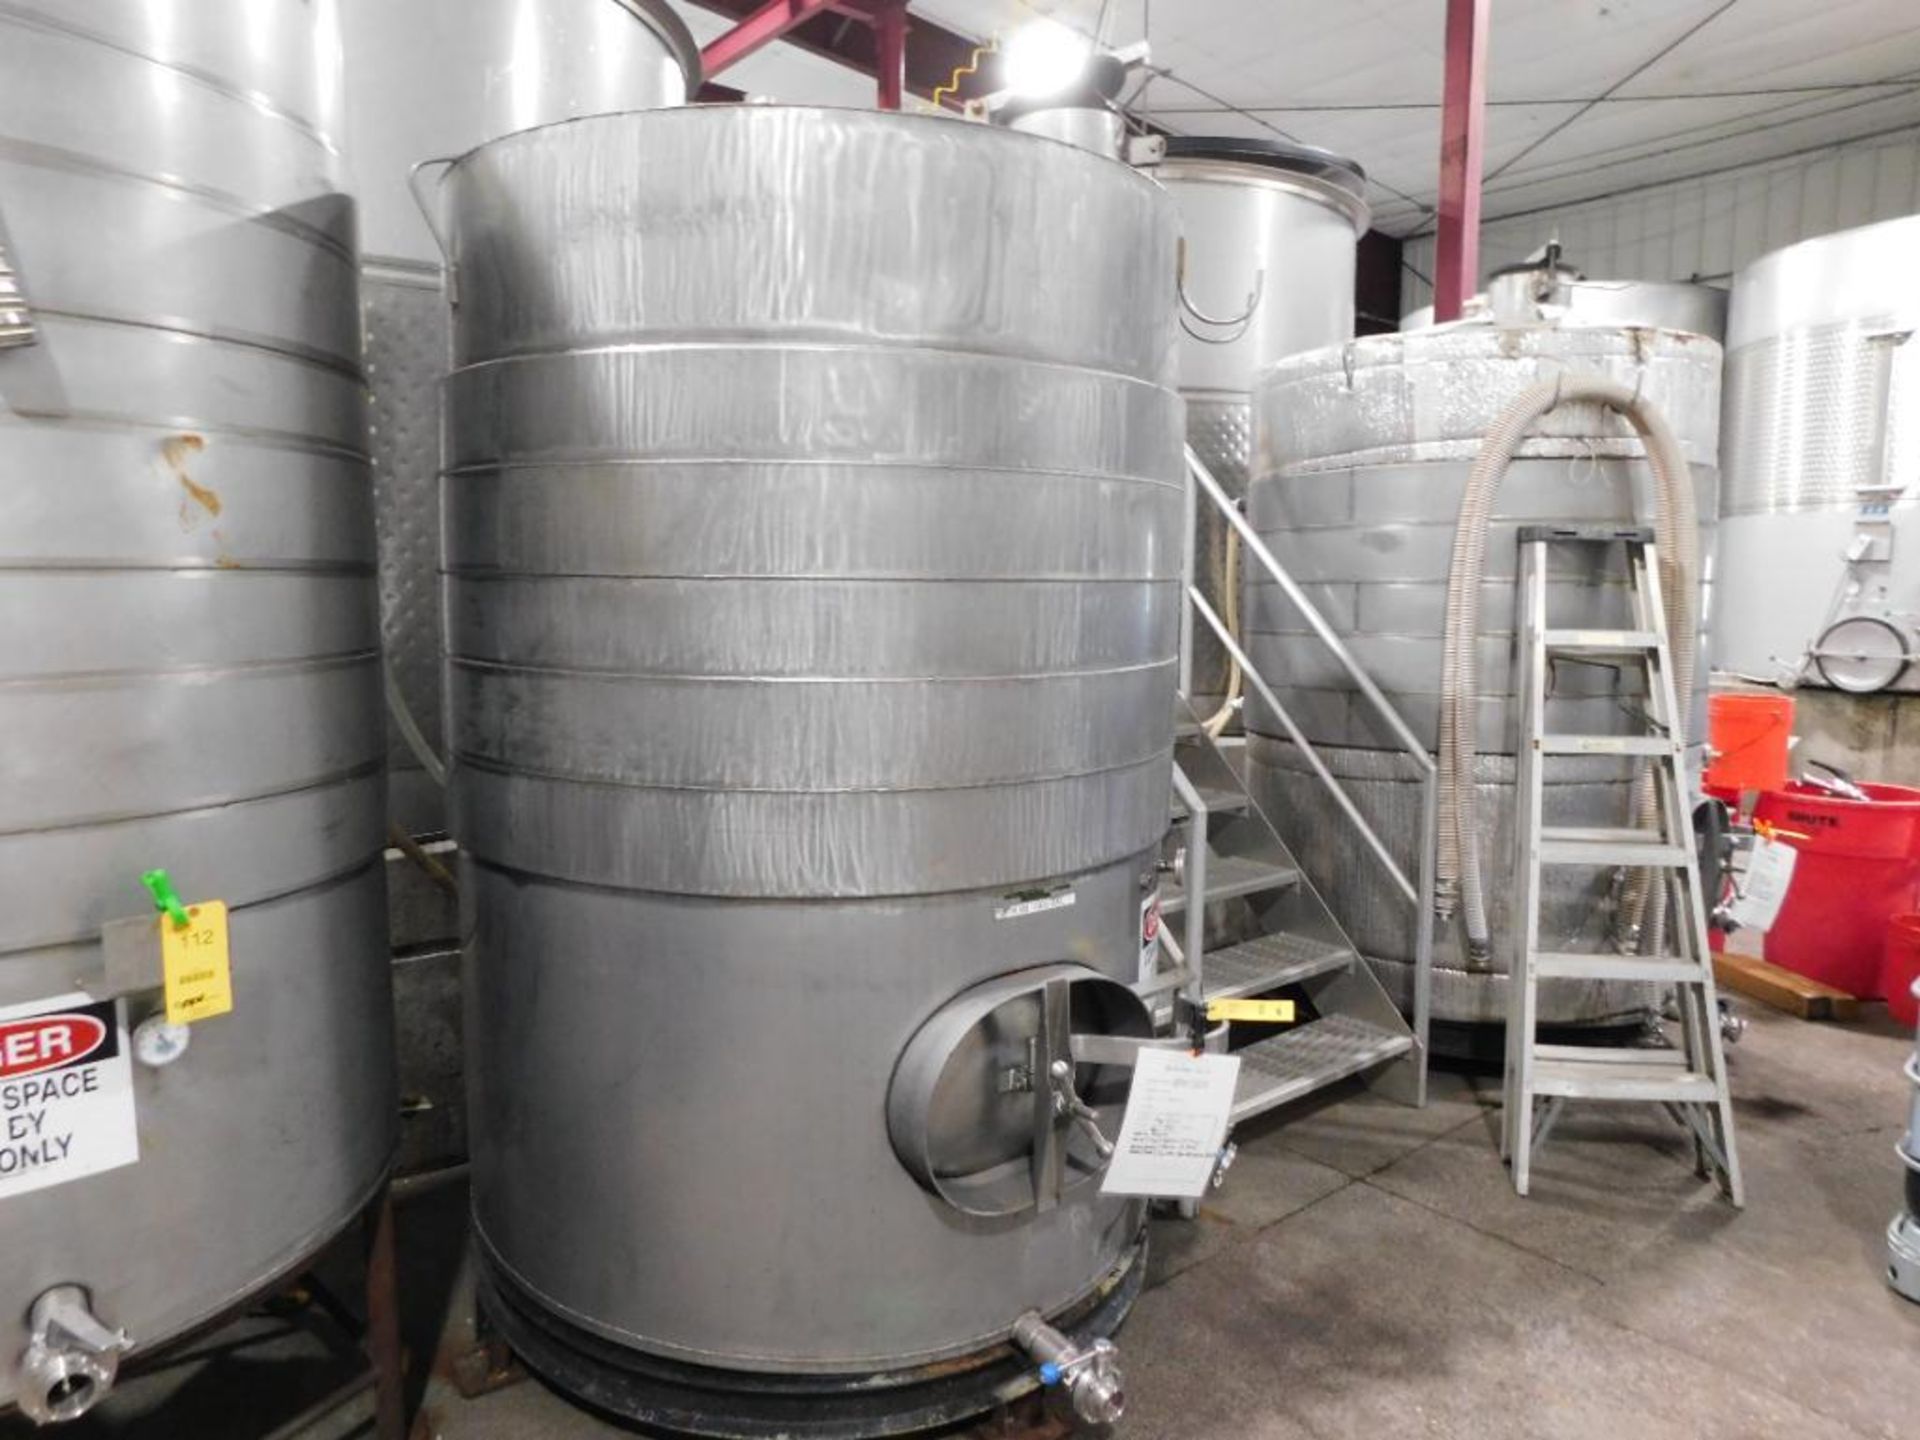 1,000 Gallon Stainless Steel Wine Storage Tank w/Glycol Jacket (LOCATED IN WINERY) - Image 2 of 3